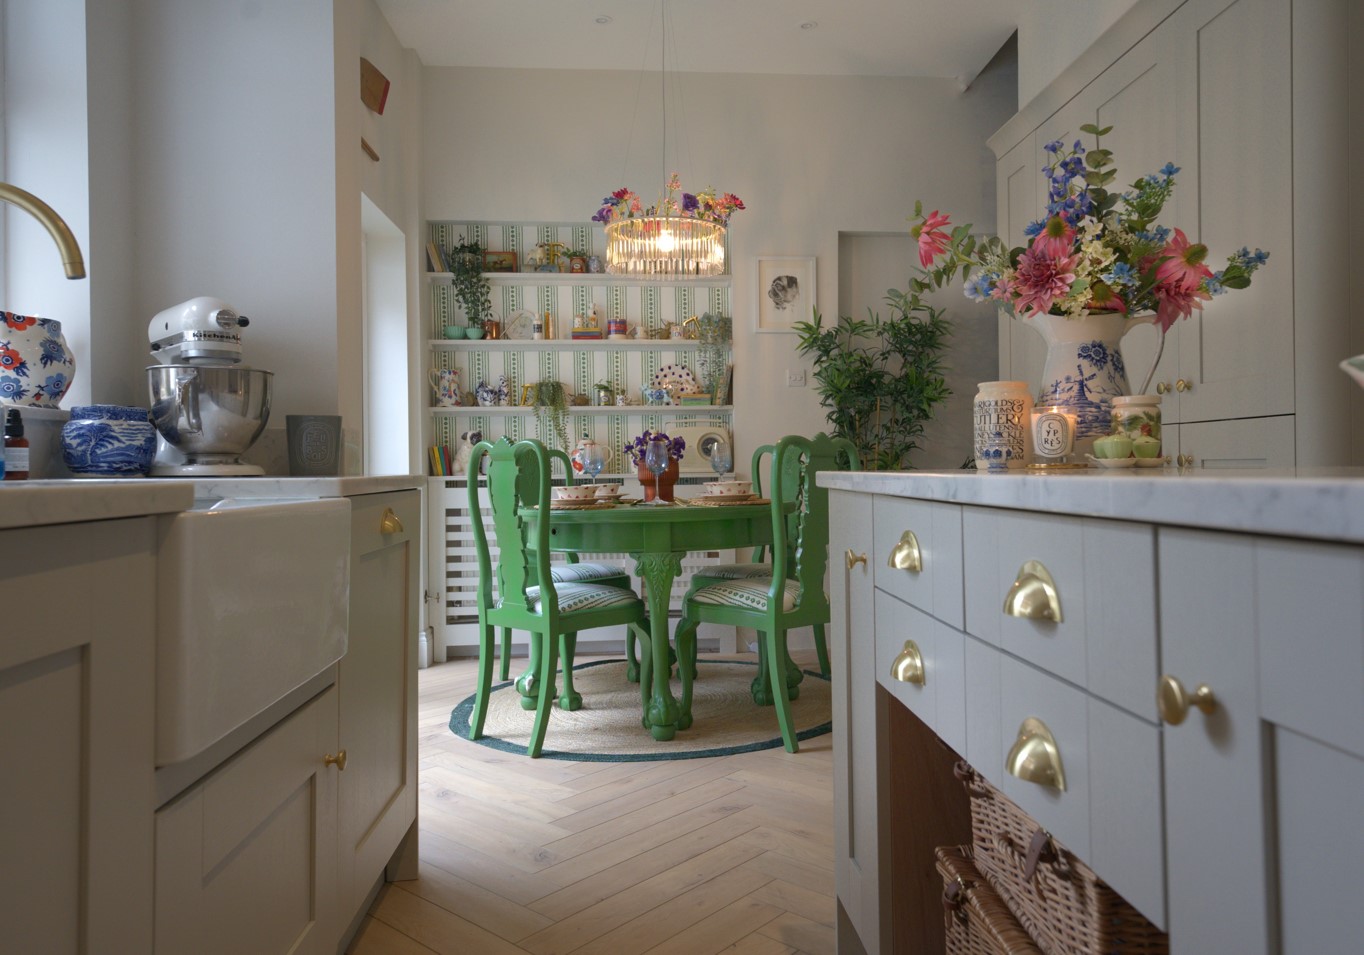 A kitchen with a green dining table, chairs and ornaments